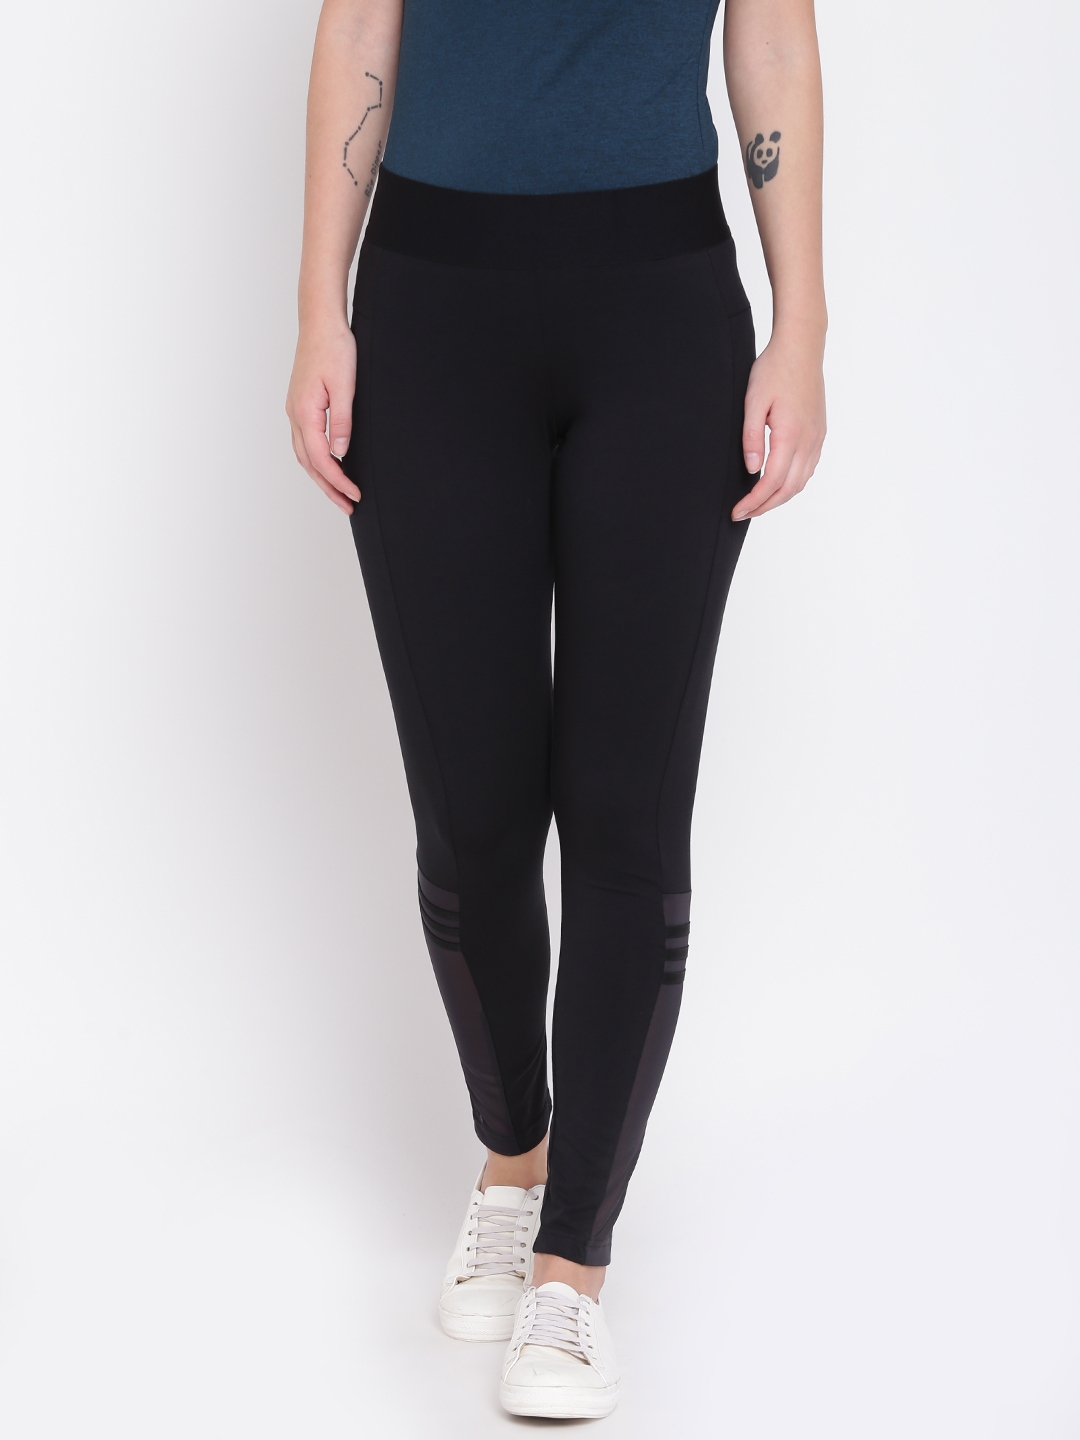 Buy ADIDAS Women Black Takeover Tights - Tights for Women 2083934 | Myntra